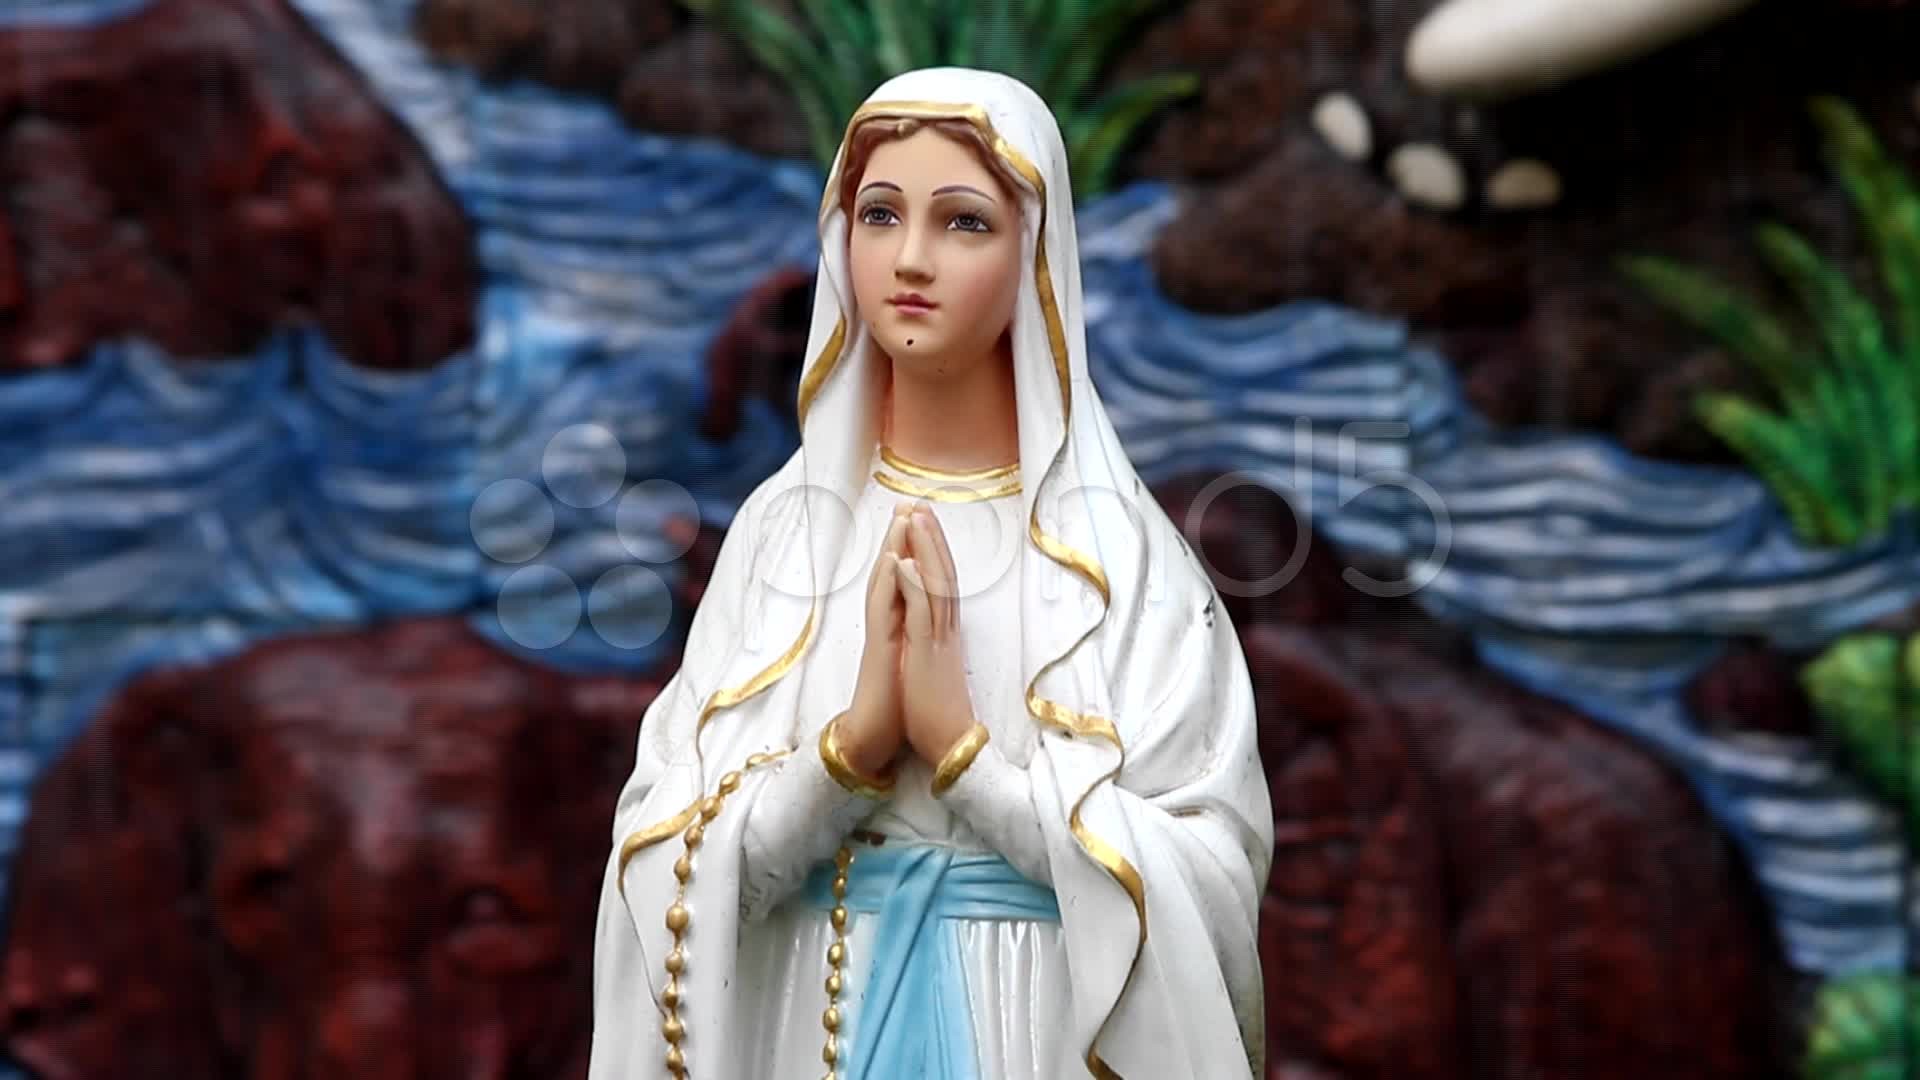 1920x1080 virgin mary images HD